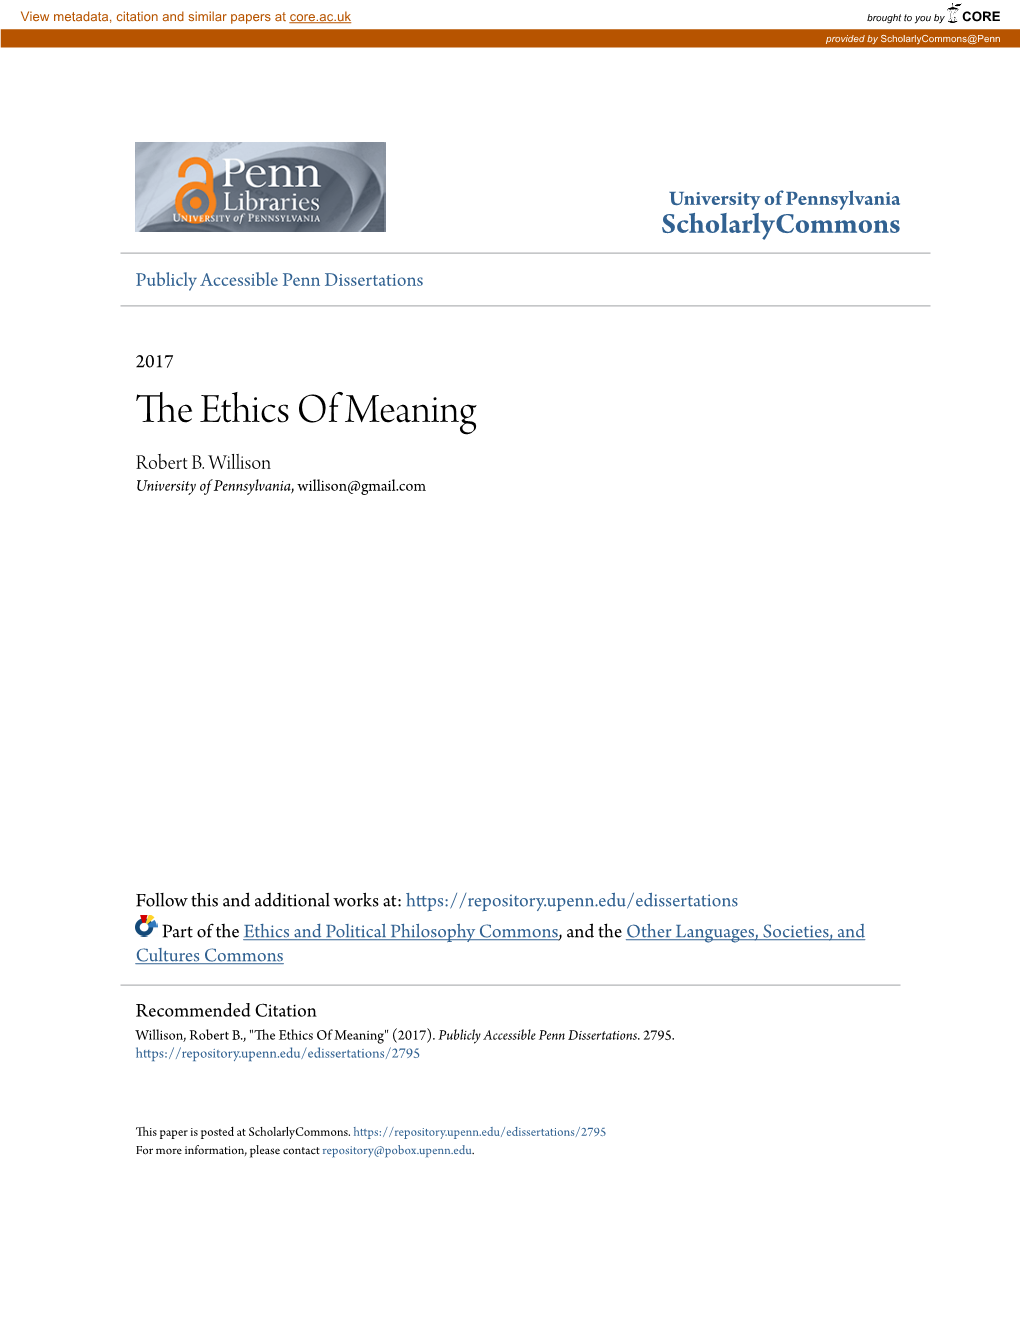 The Ethics of Meaning